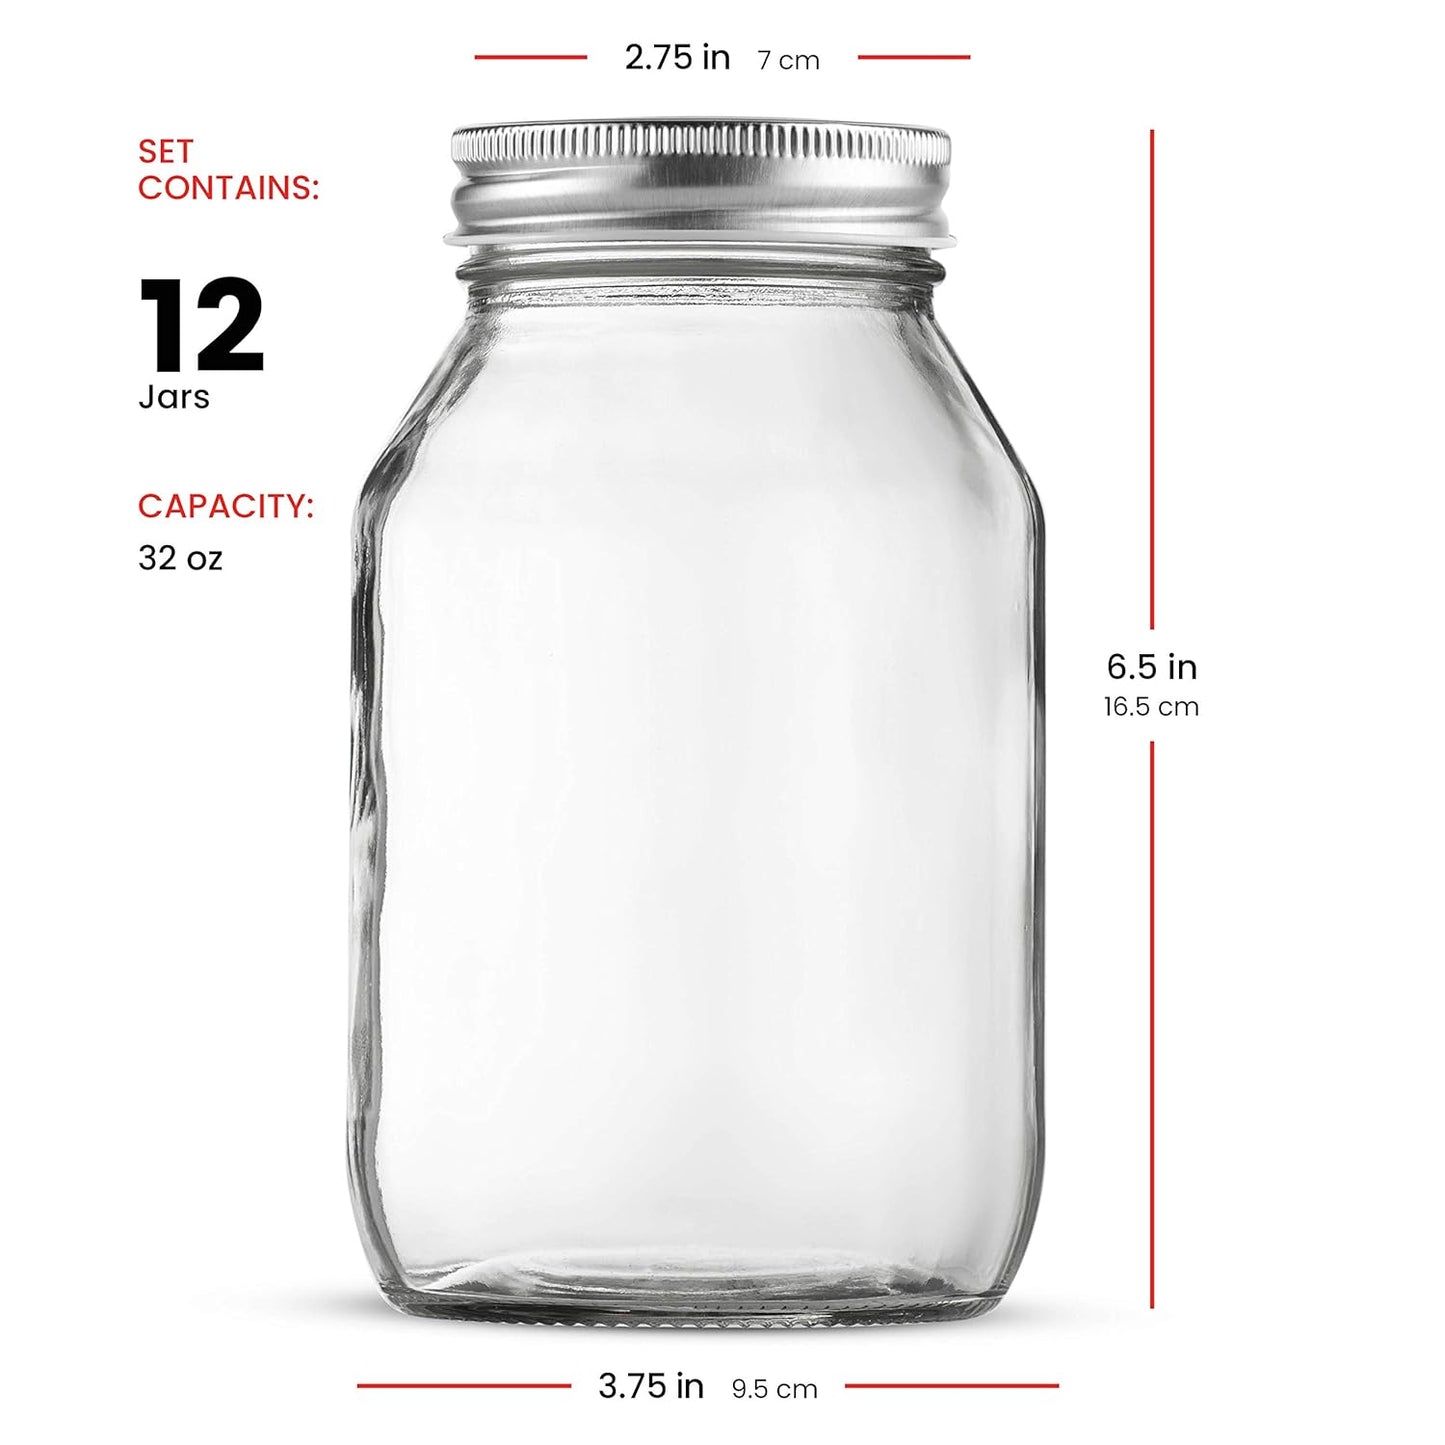 Glass Regular Mouth Mason Jars, 32 Ounce (12 Pack) Glass Jars with Silver Metal Airtight Lids for Meal Prep, Food Storage, Canning, Drinking, Overnight Oats, Jelly, Dry Food, Spices, Sa